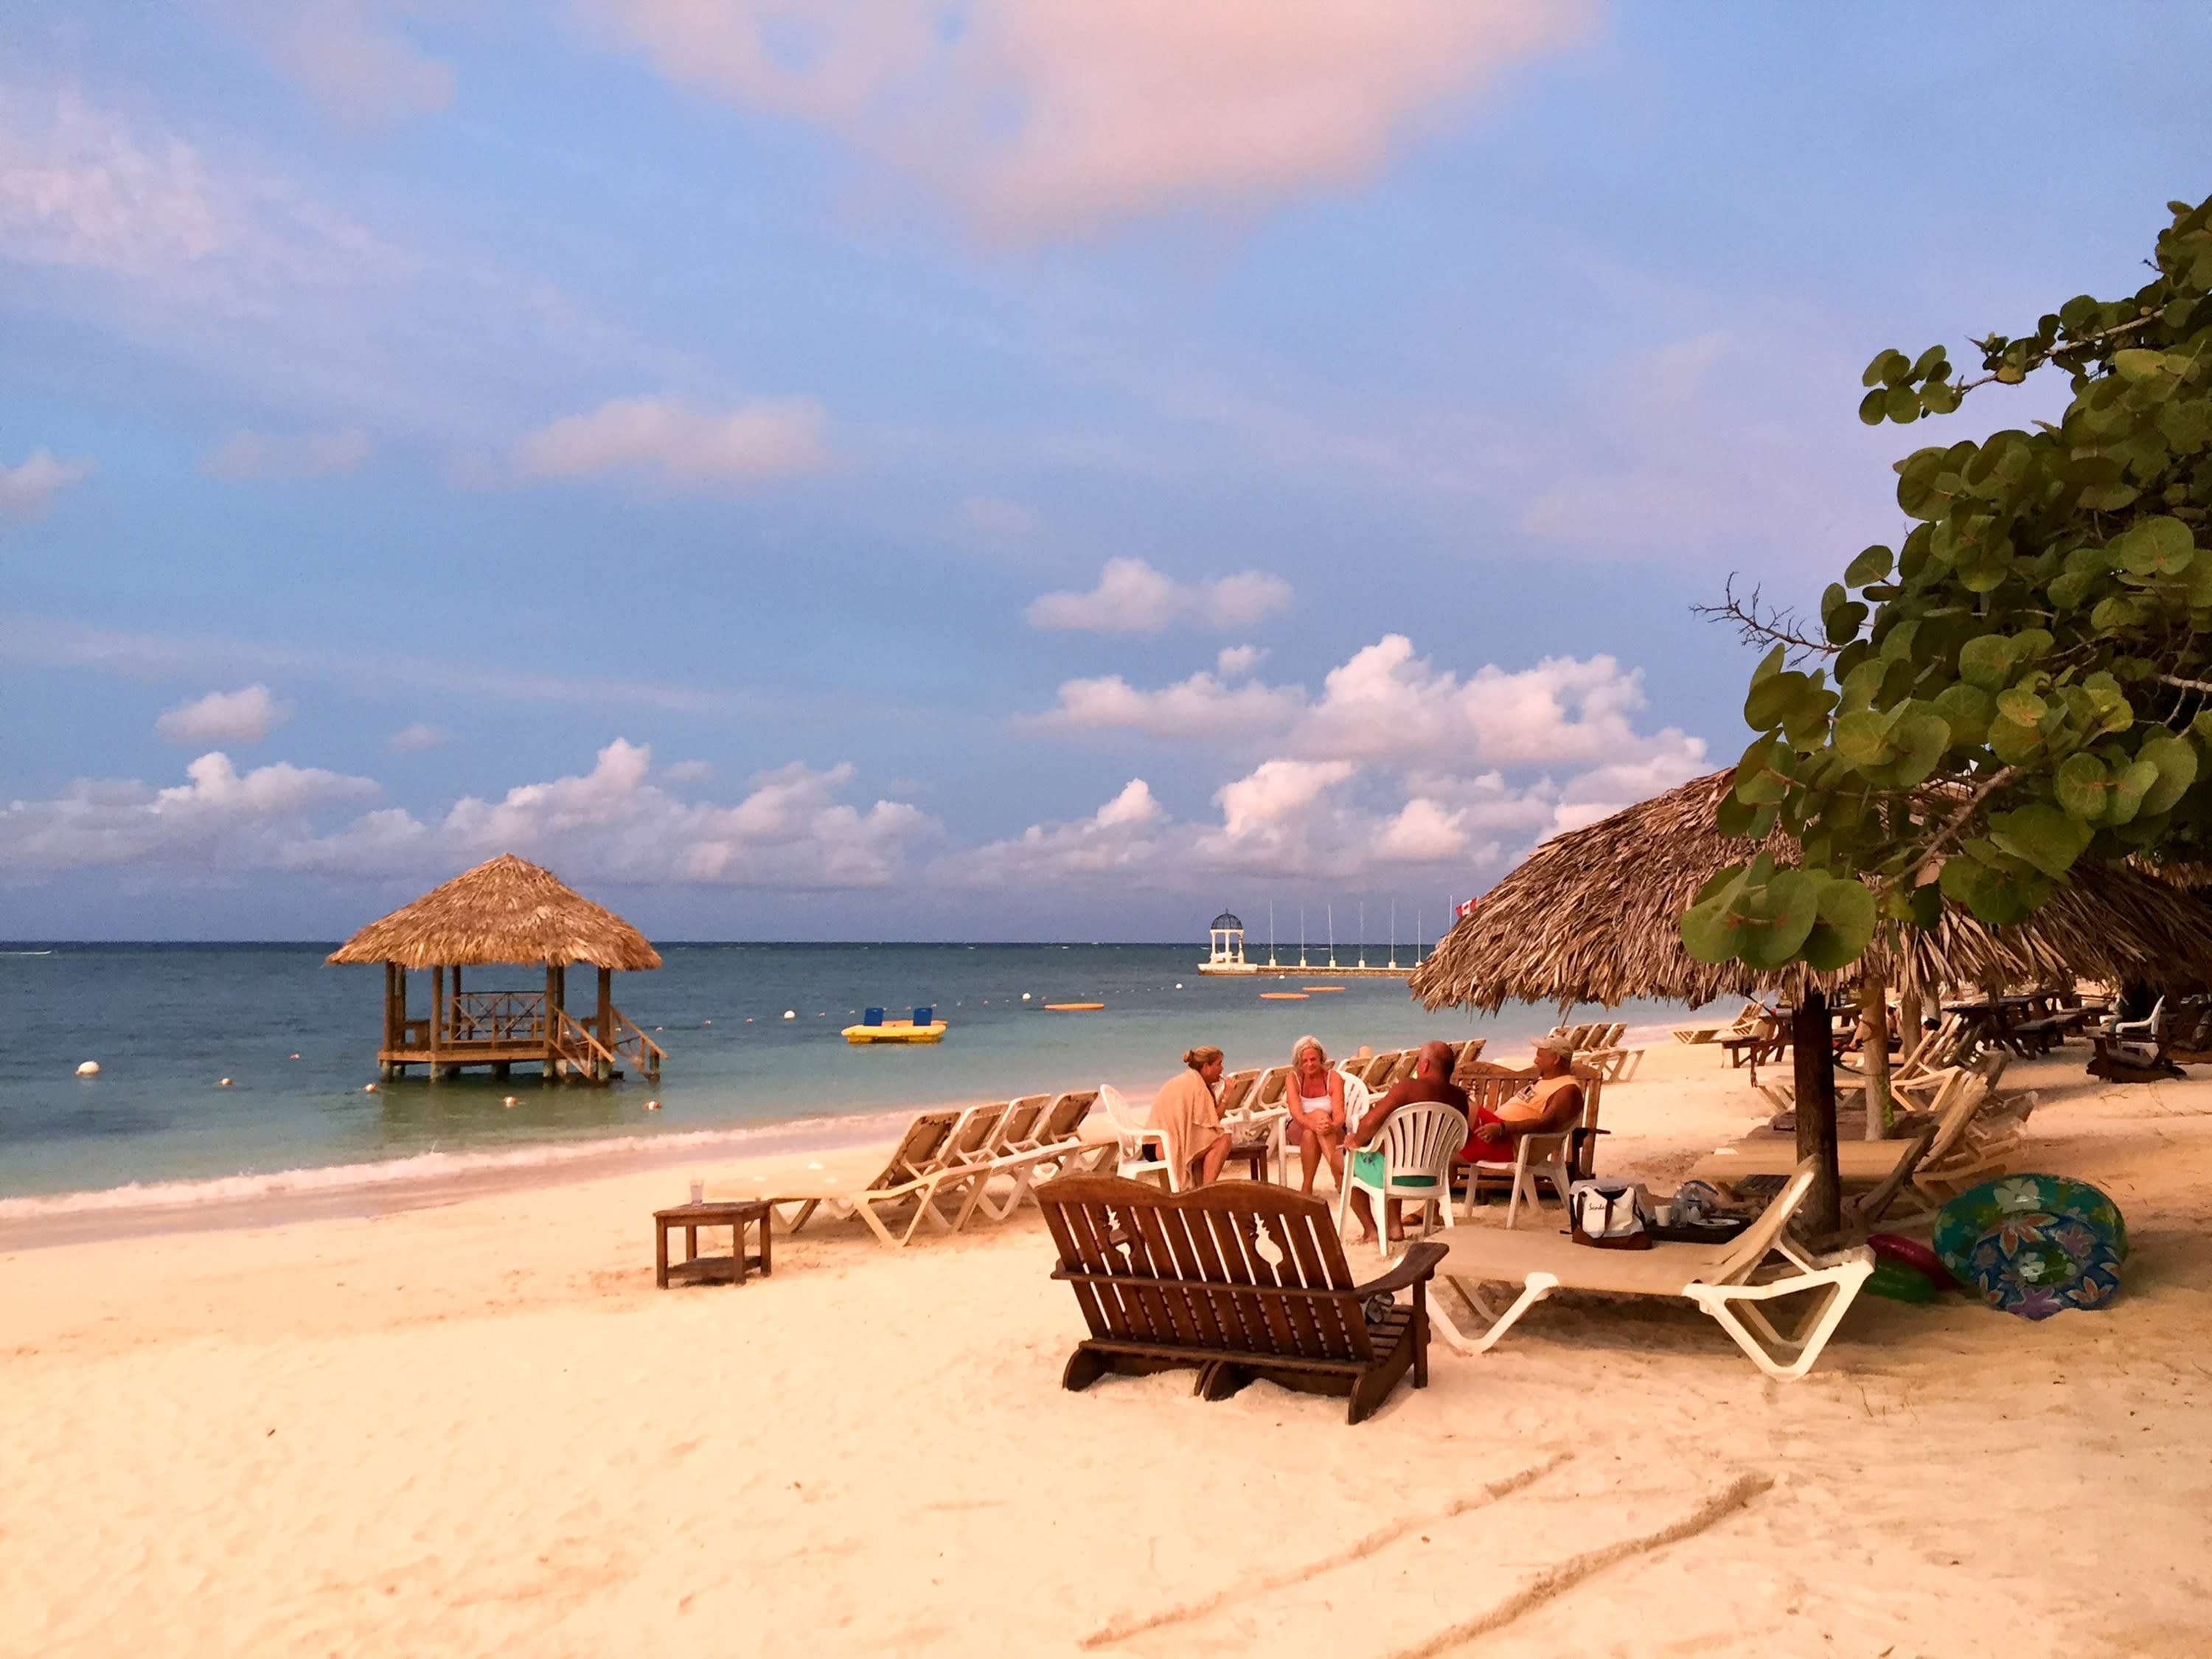 Tourists in Jamaica Warned Not to Leave Resorts Due to Violent Crime